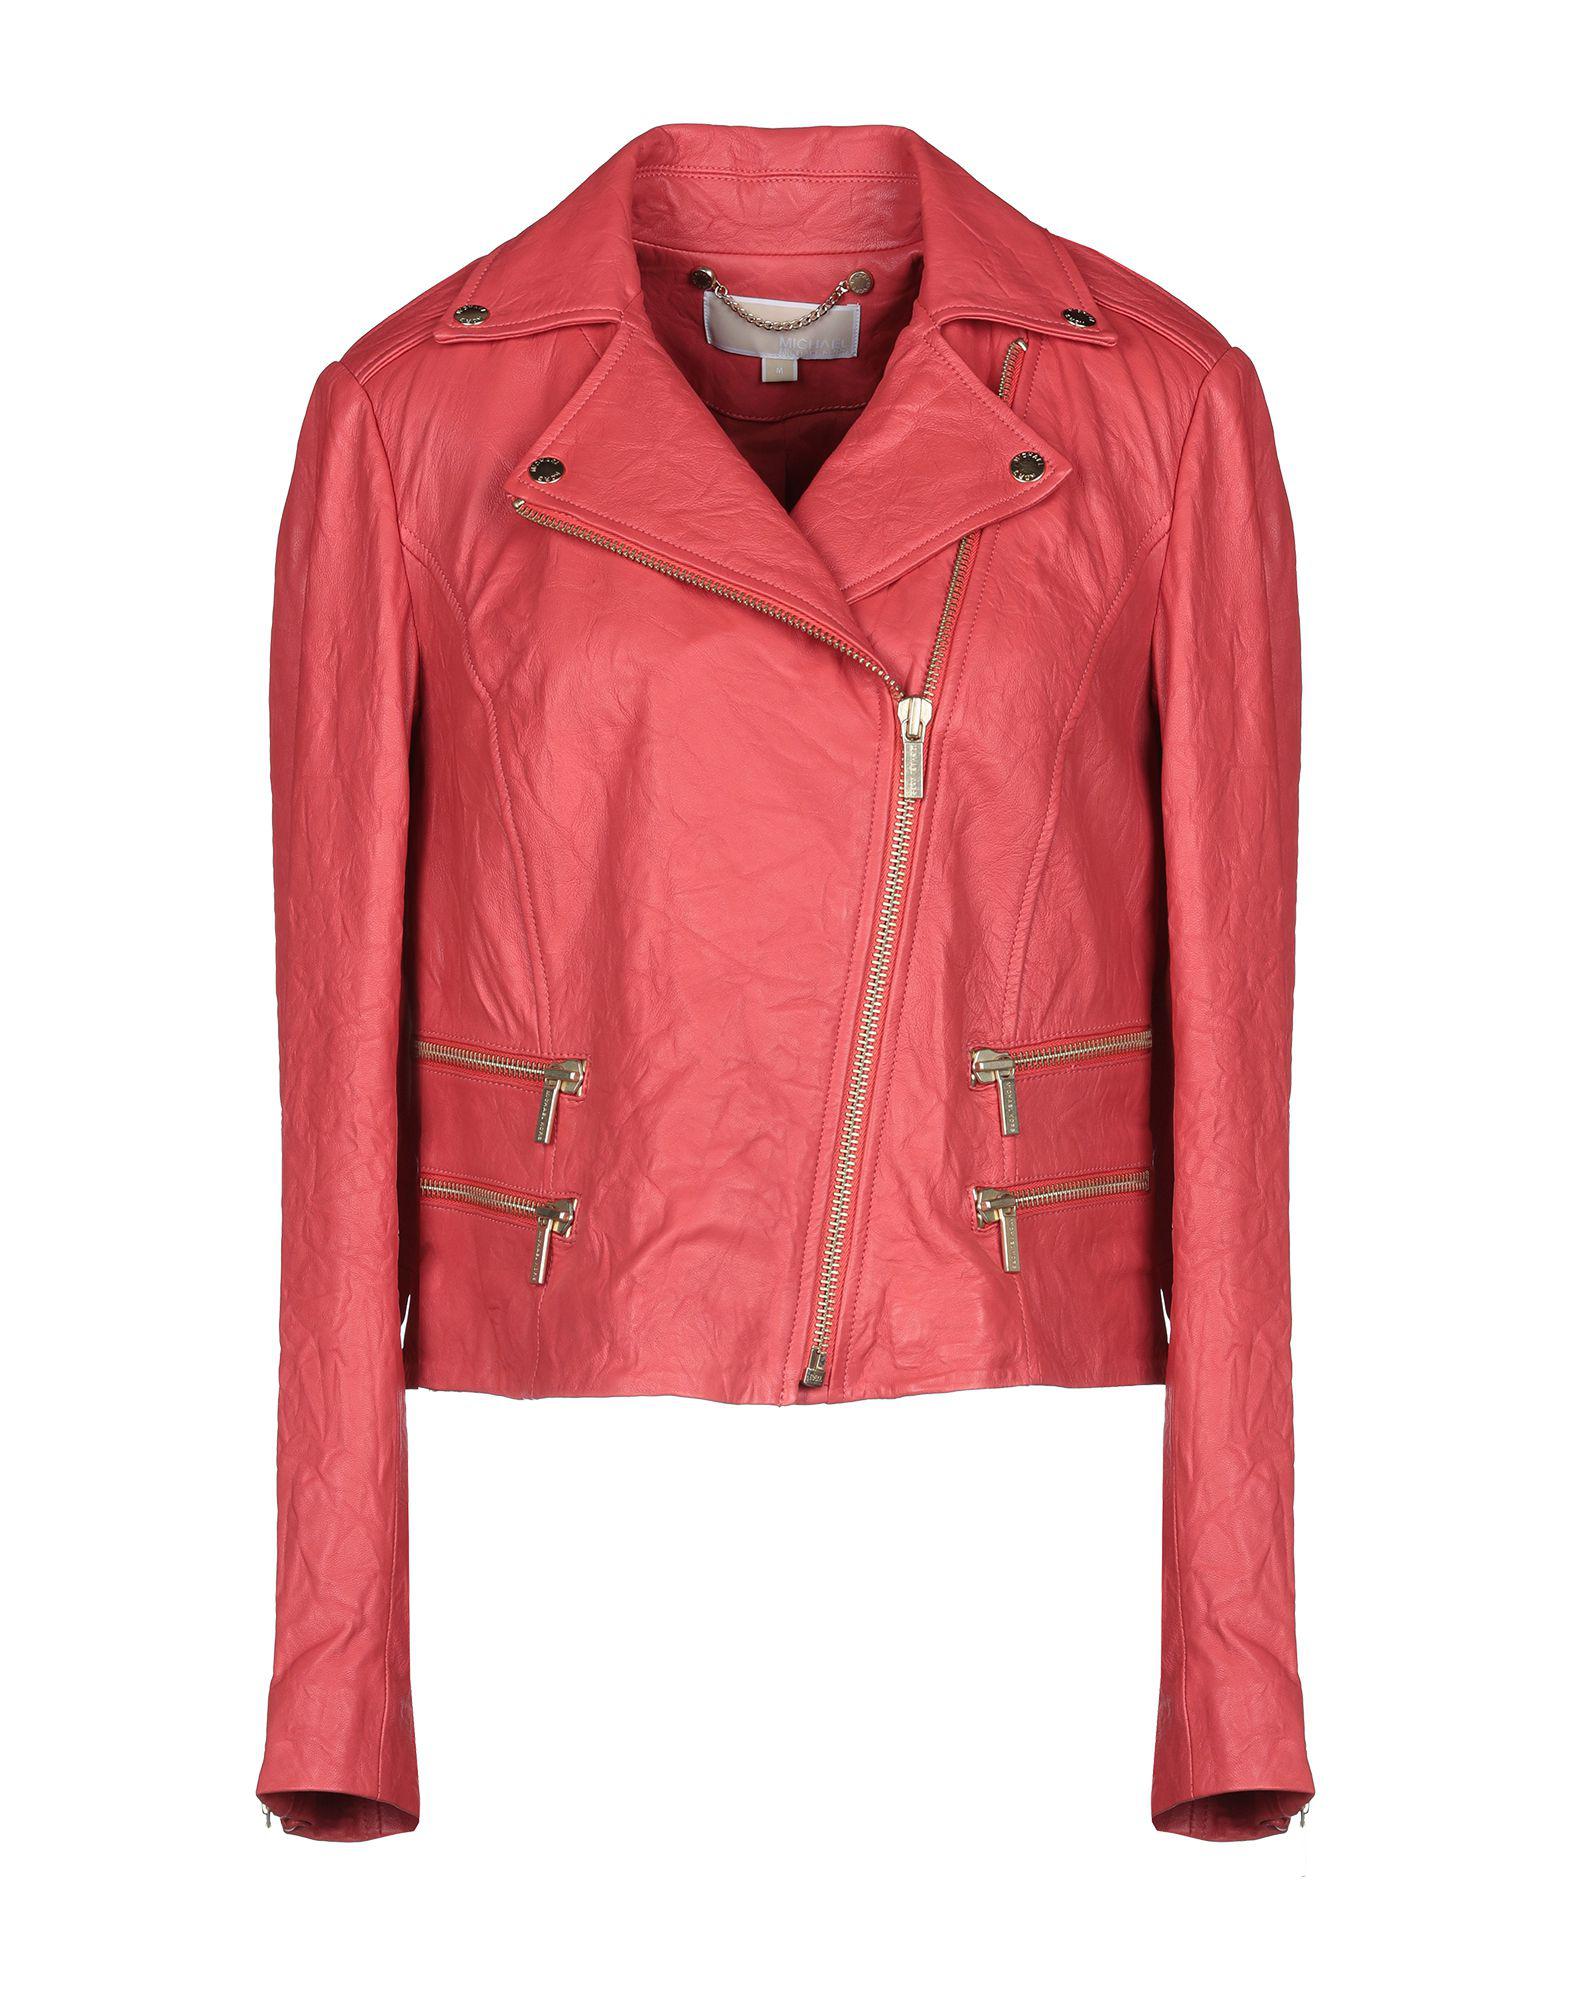 MICHAEL Michael Kors Leather Jacket in Coral (Pink) - Lyst